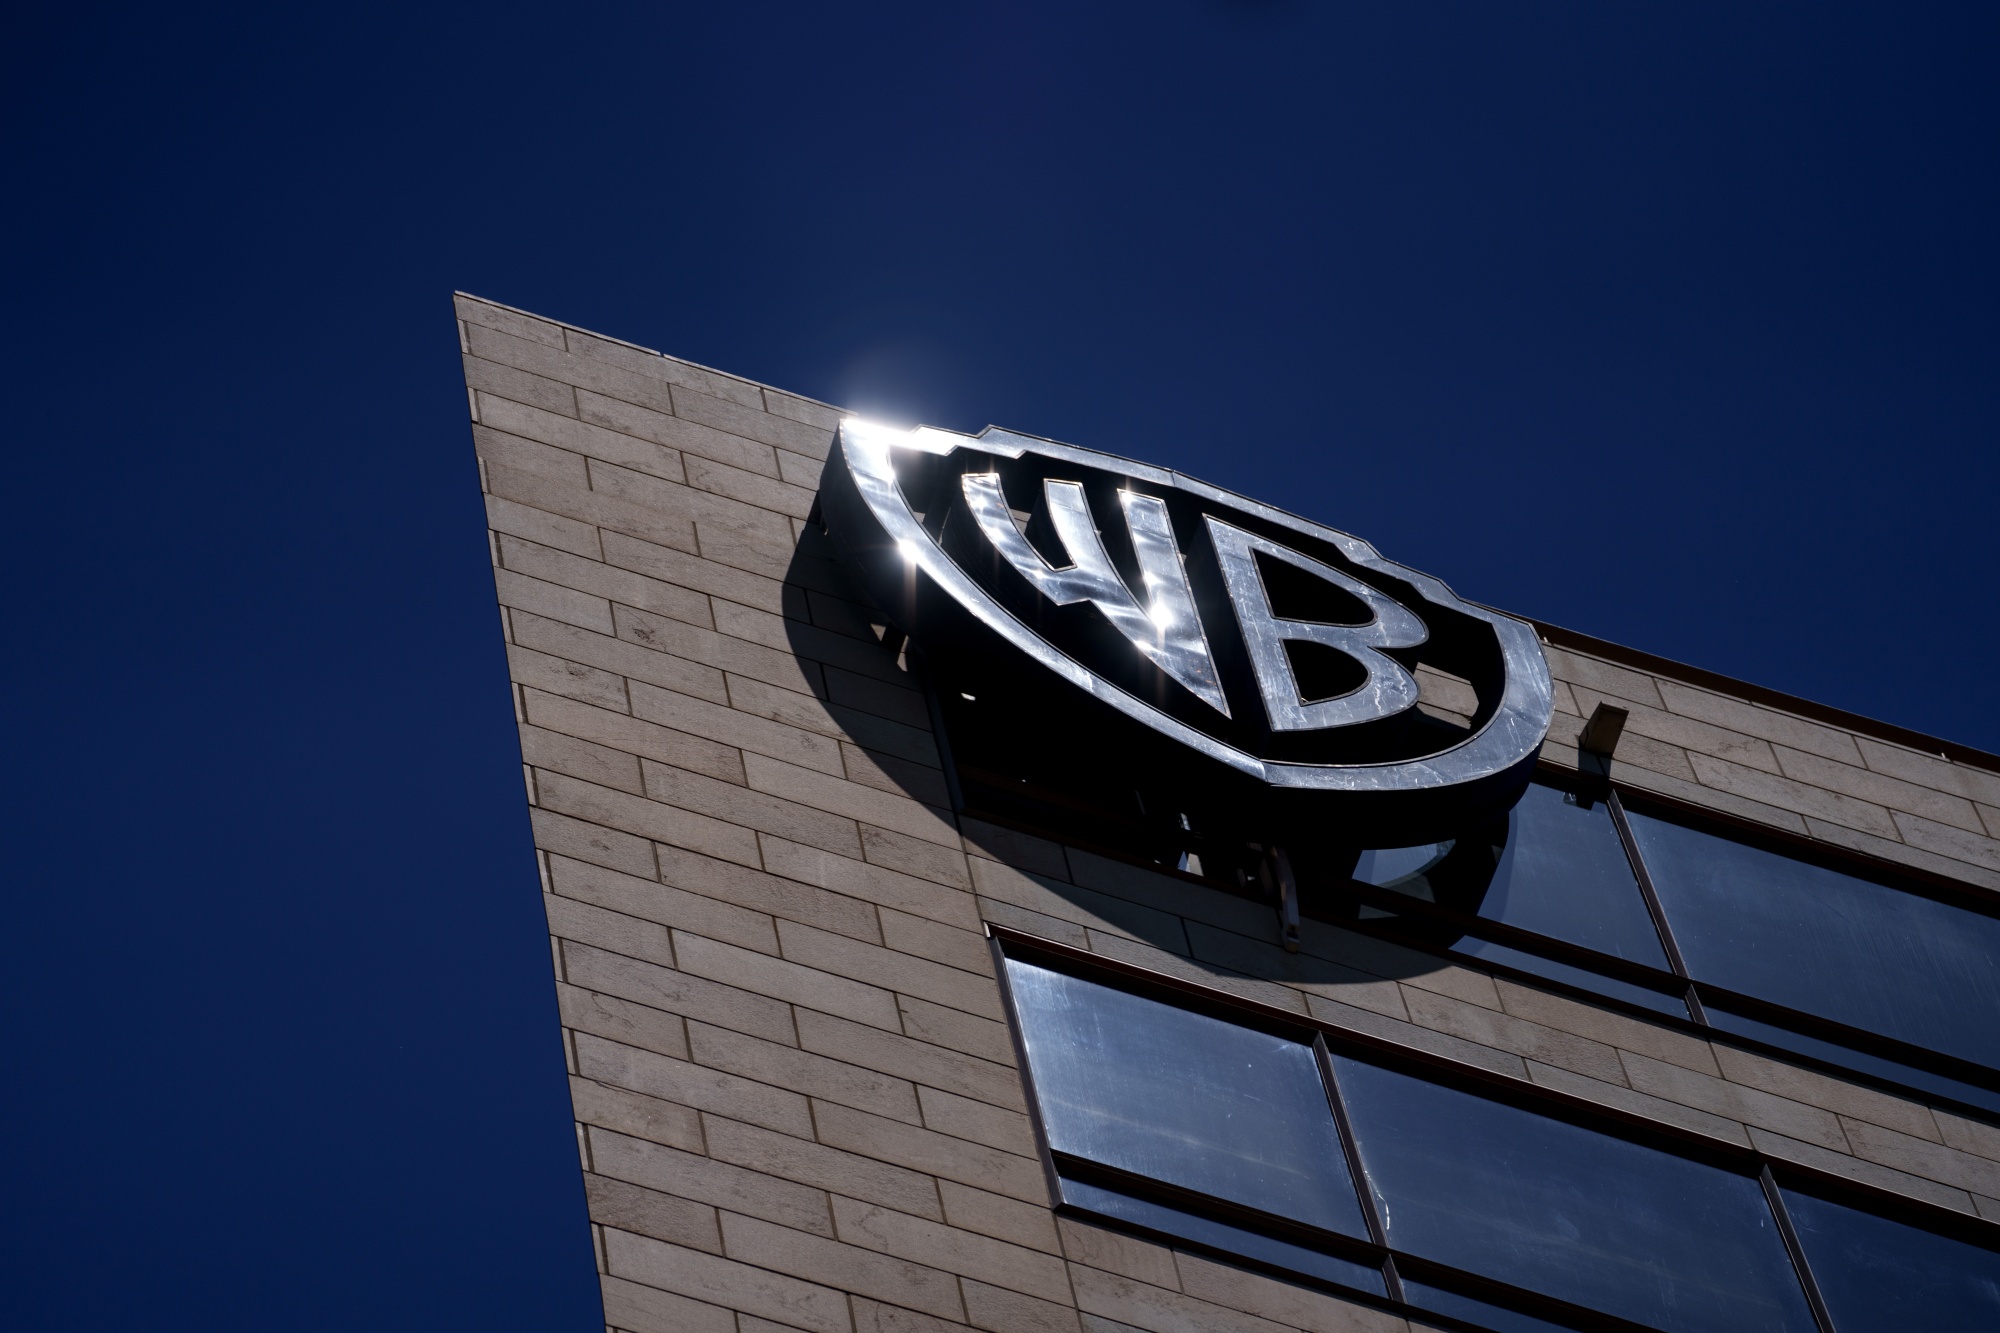 Warner Bros. (WBD) Shares Slide After Wider-Than-Expected Quarterly Loss -  Bloomberg